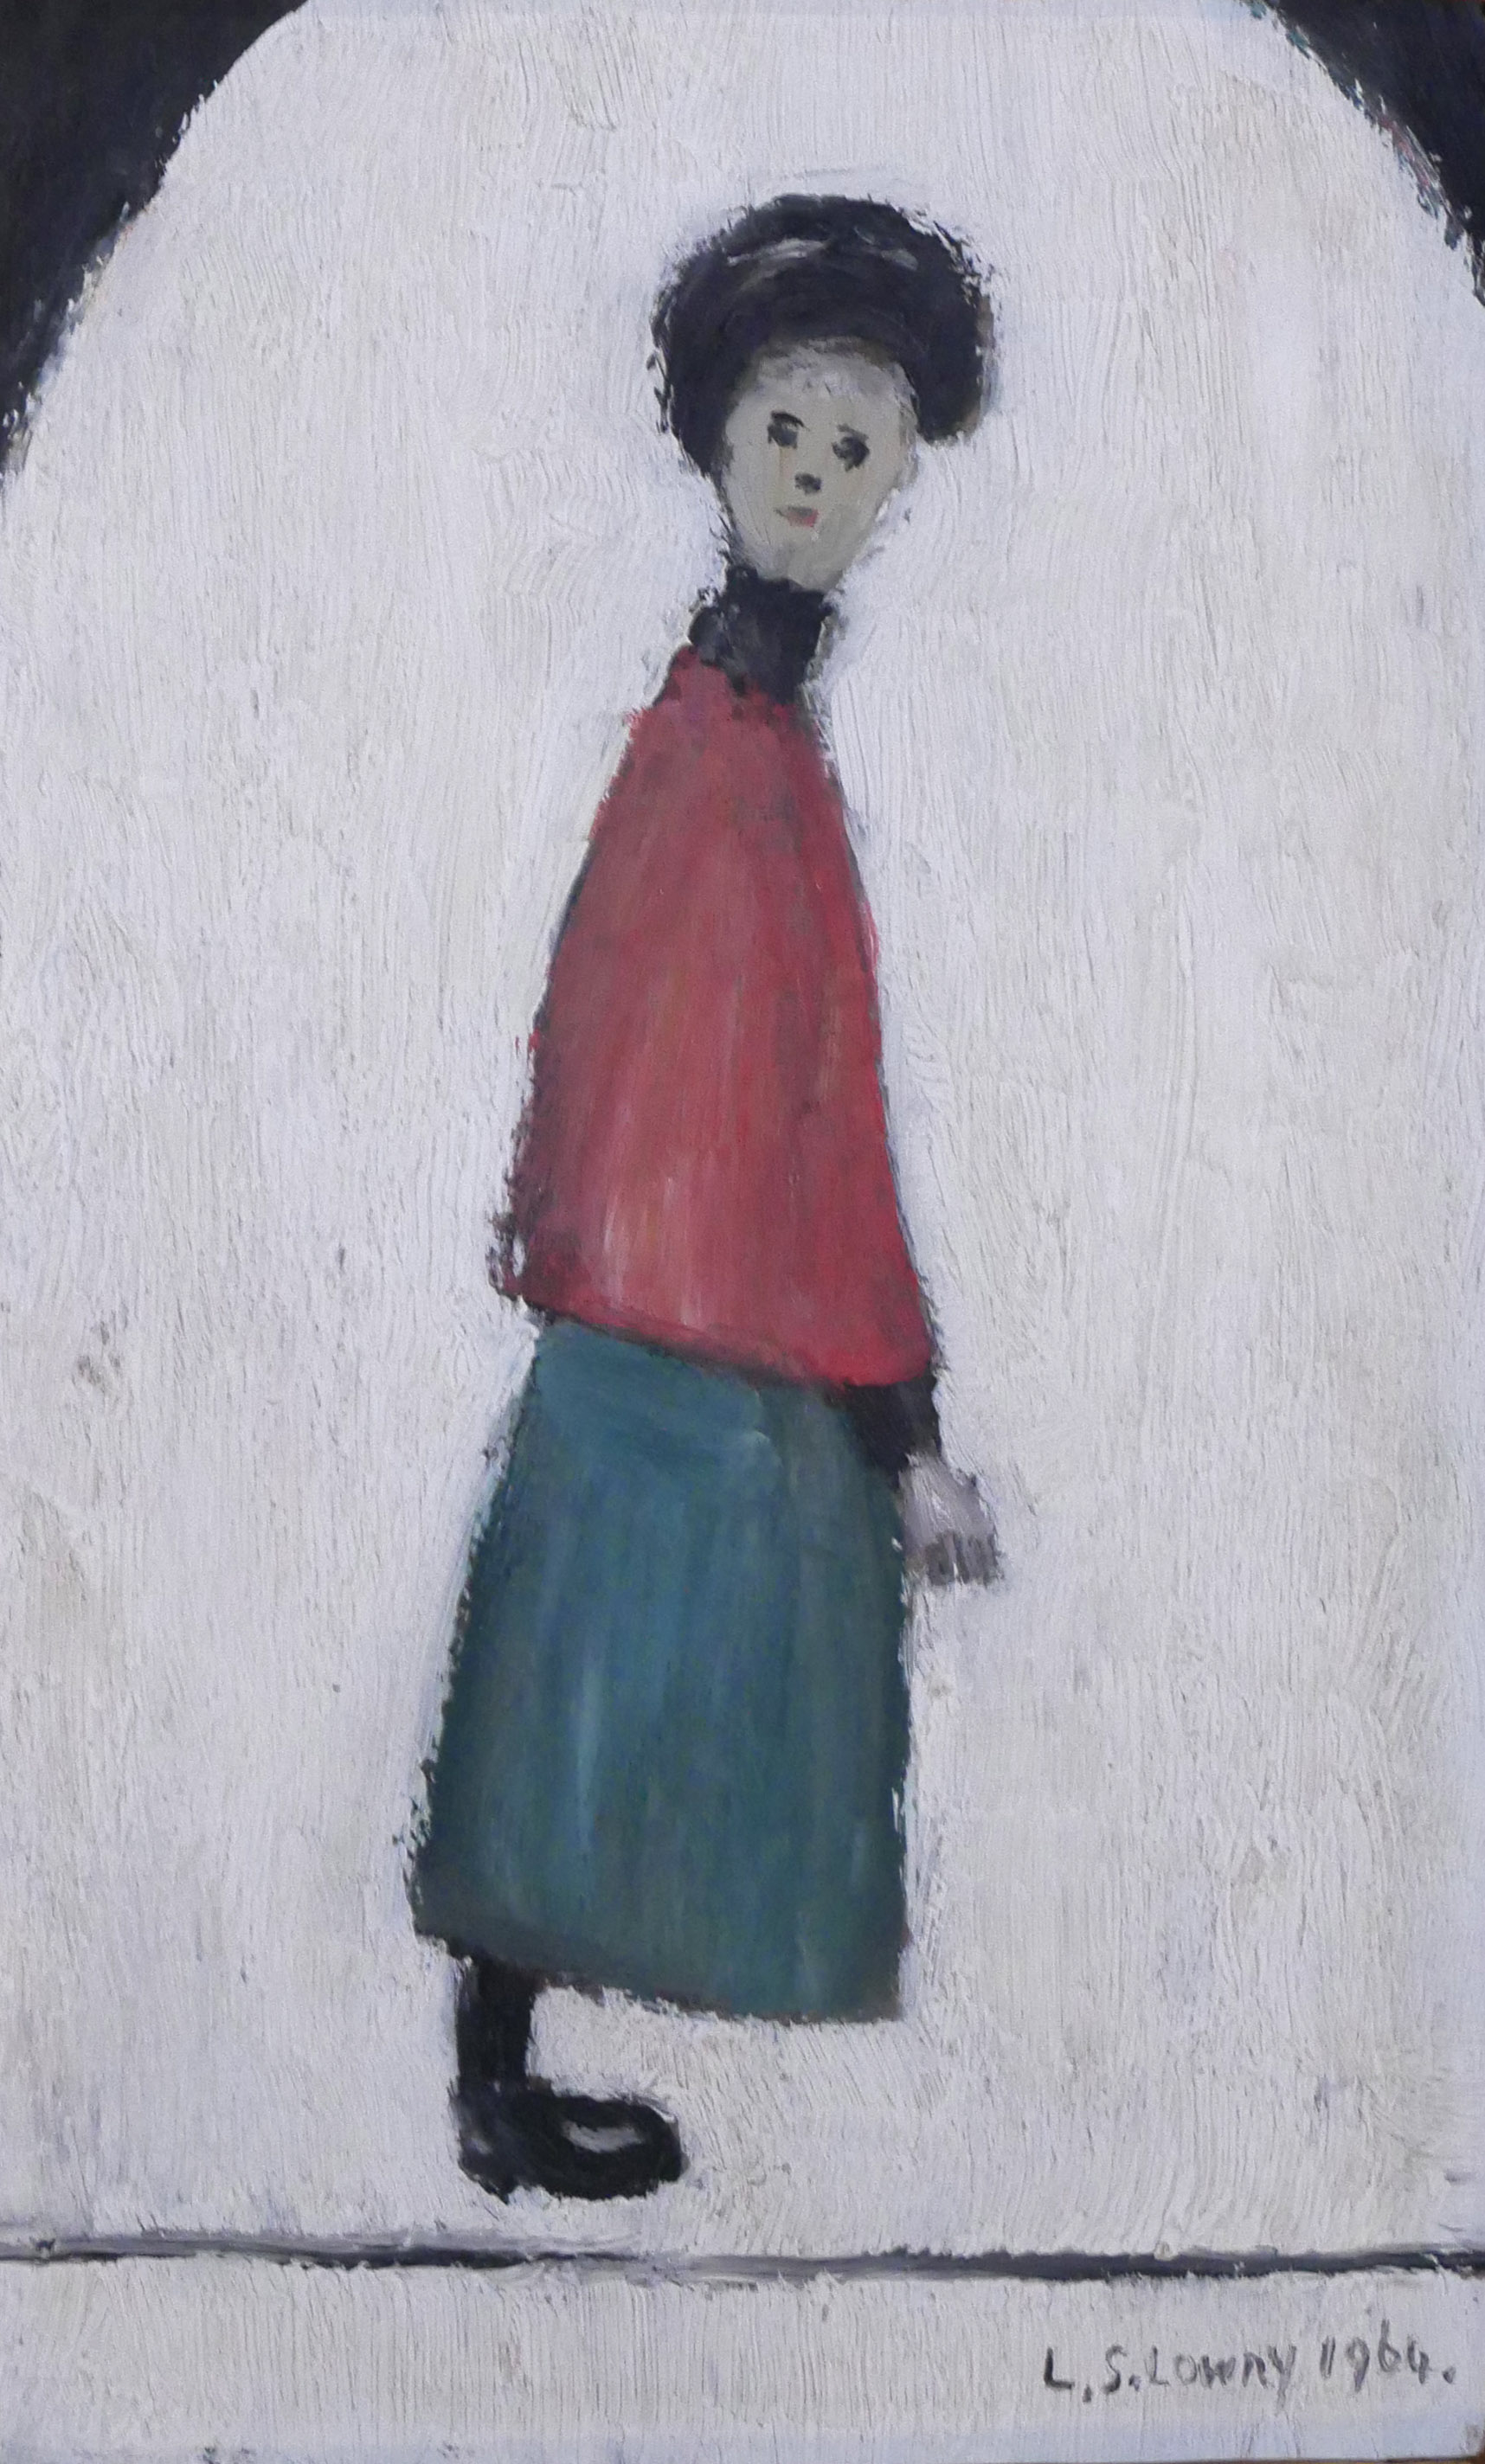 LAWRENCE STEPHEN LOWRY R.A., BRITISH, 1887 0 1976, OIL ON BOARD Titled 'Lady in Waiting', signed and - Image 15 of 41